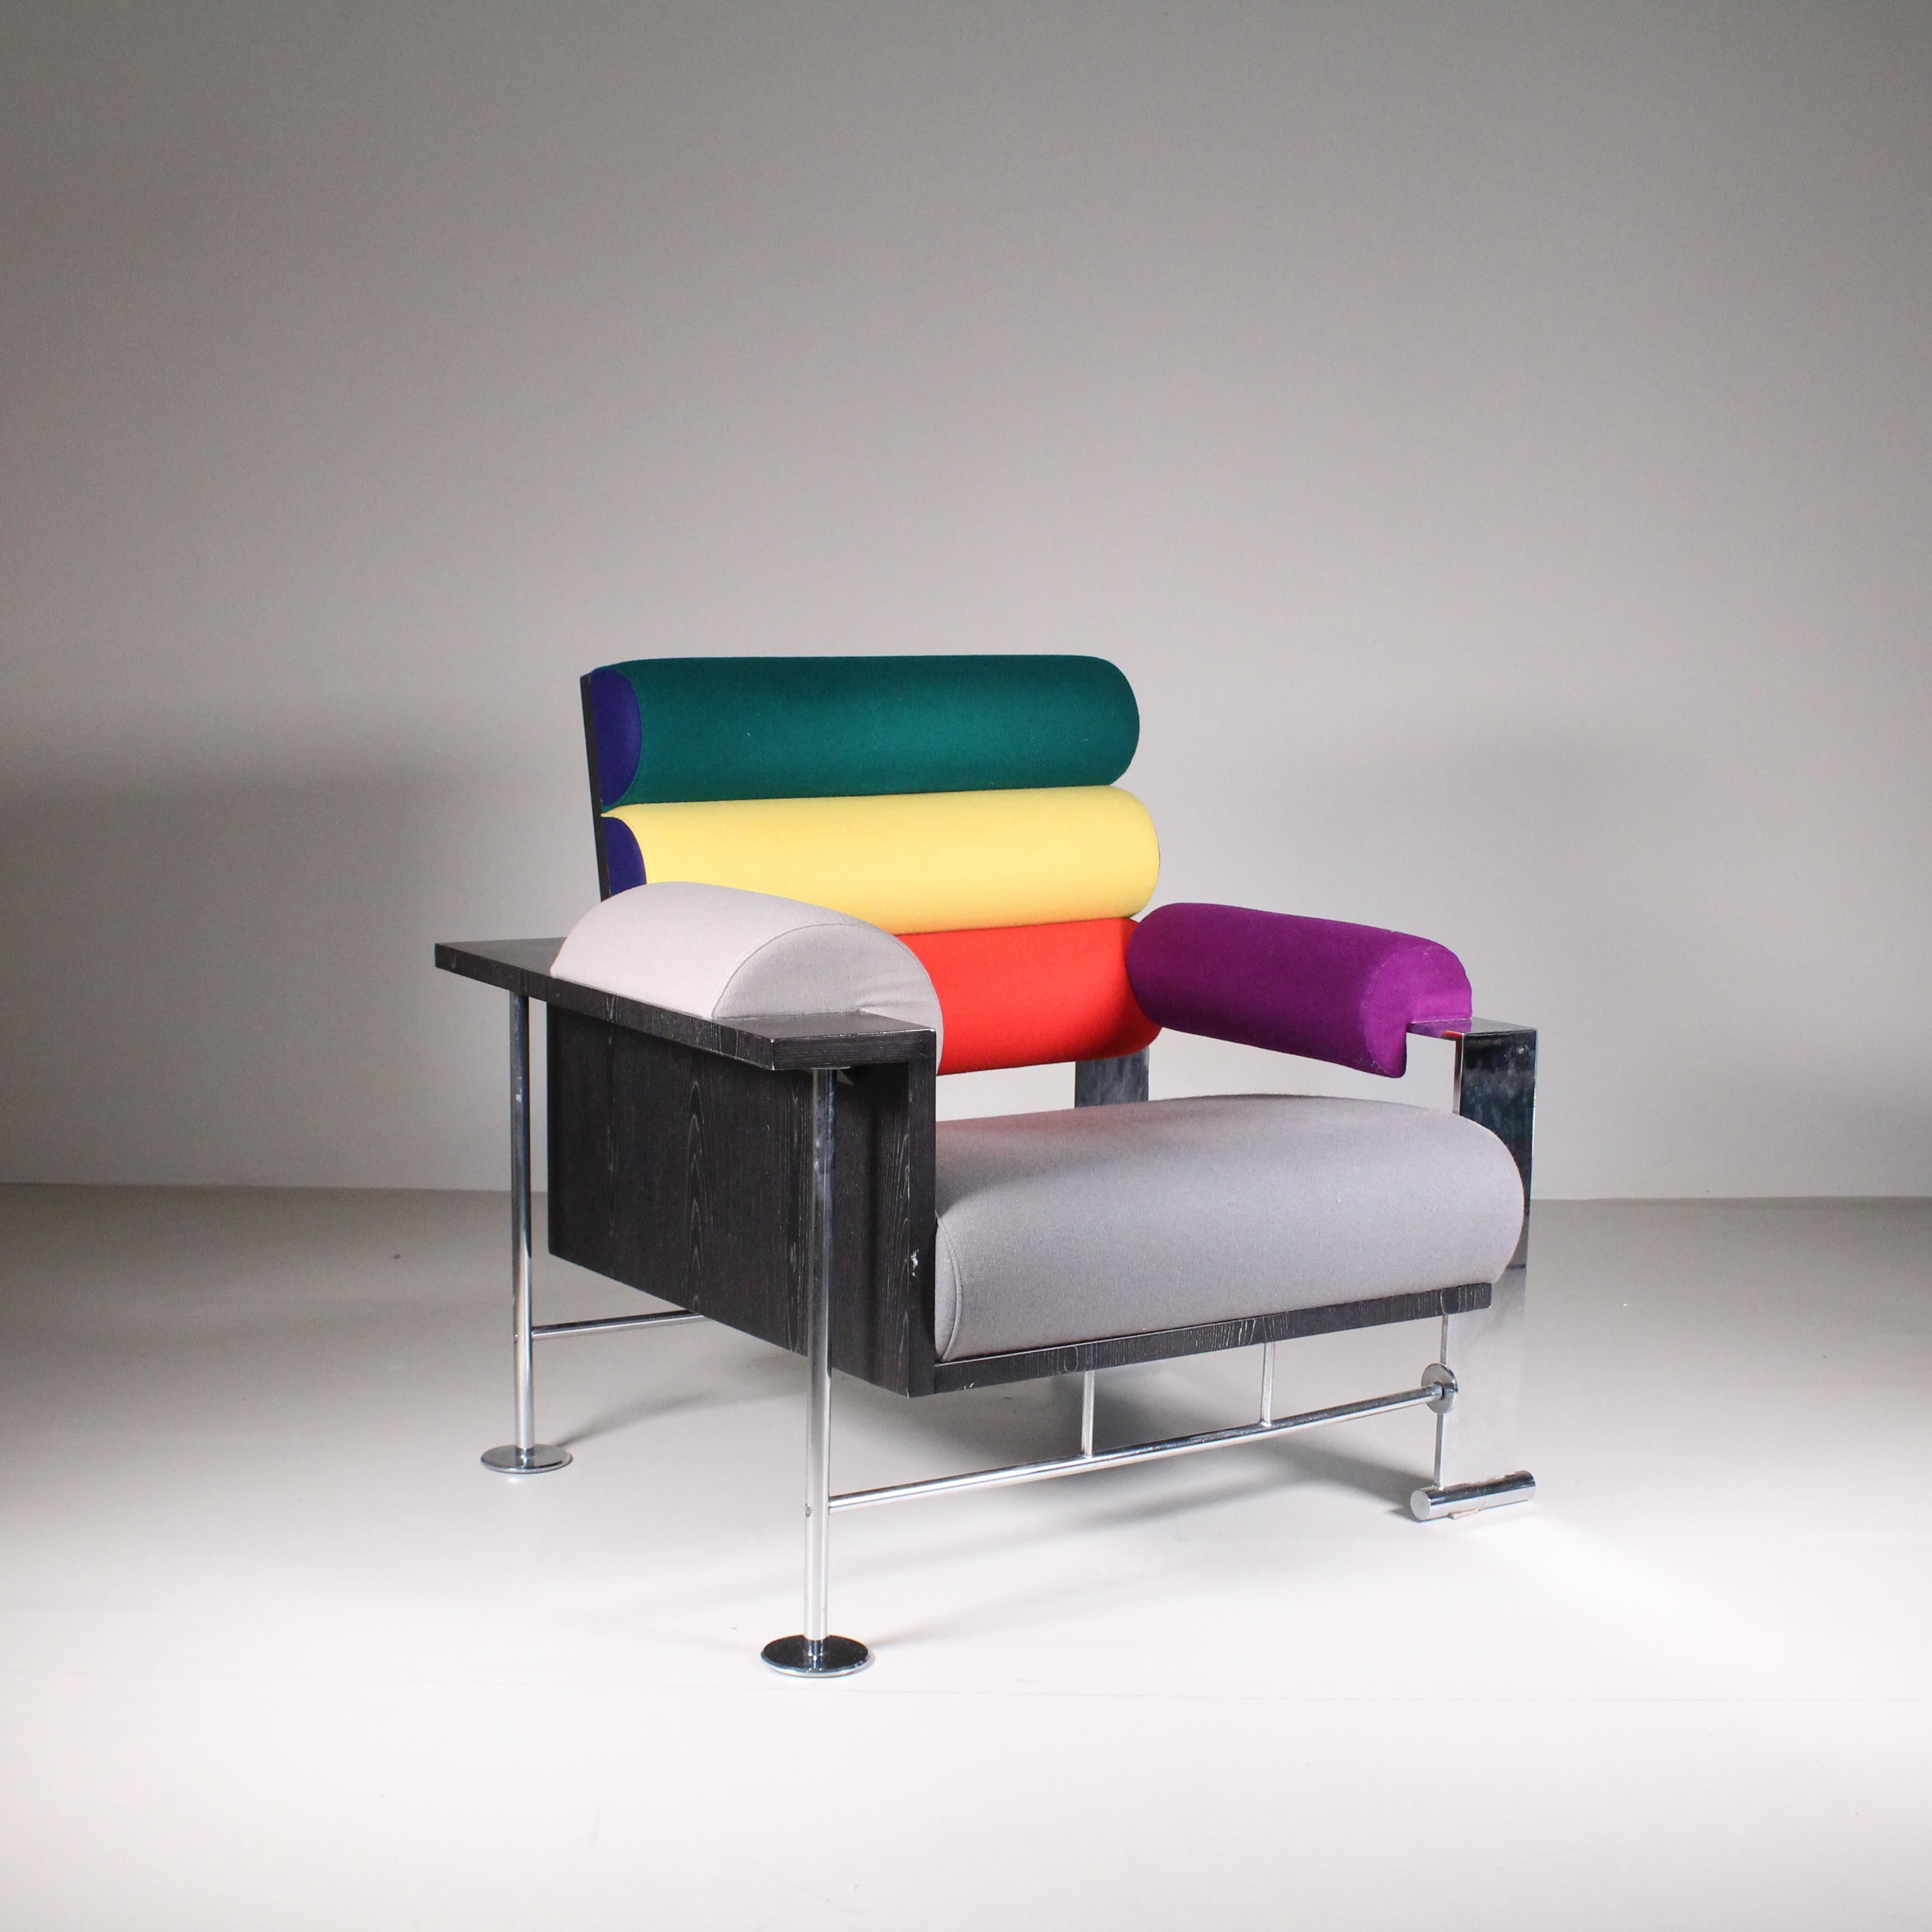 Las Vegas armchair by Peter Shire, 1988 For Sale 5